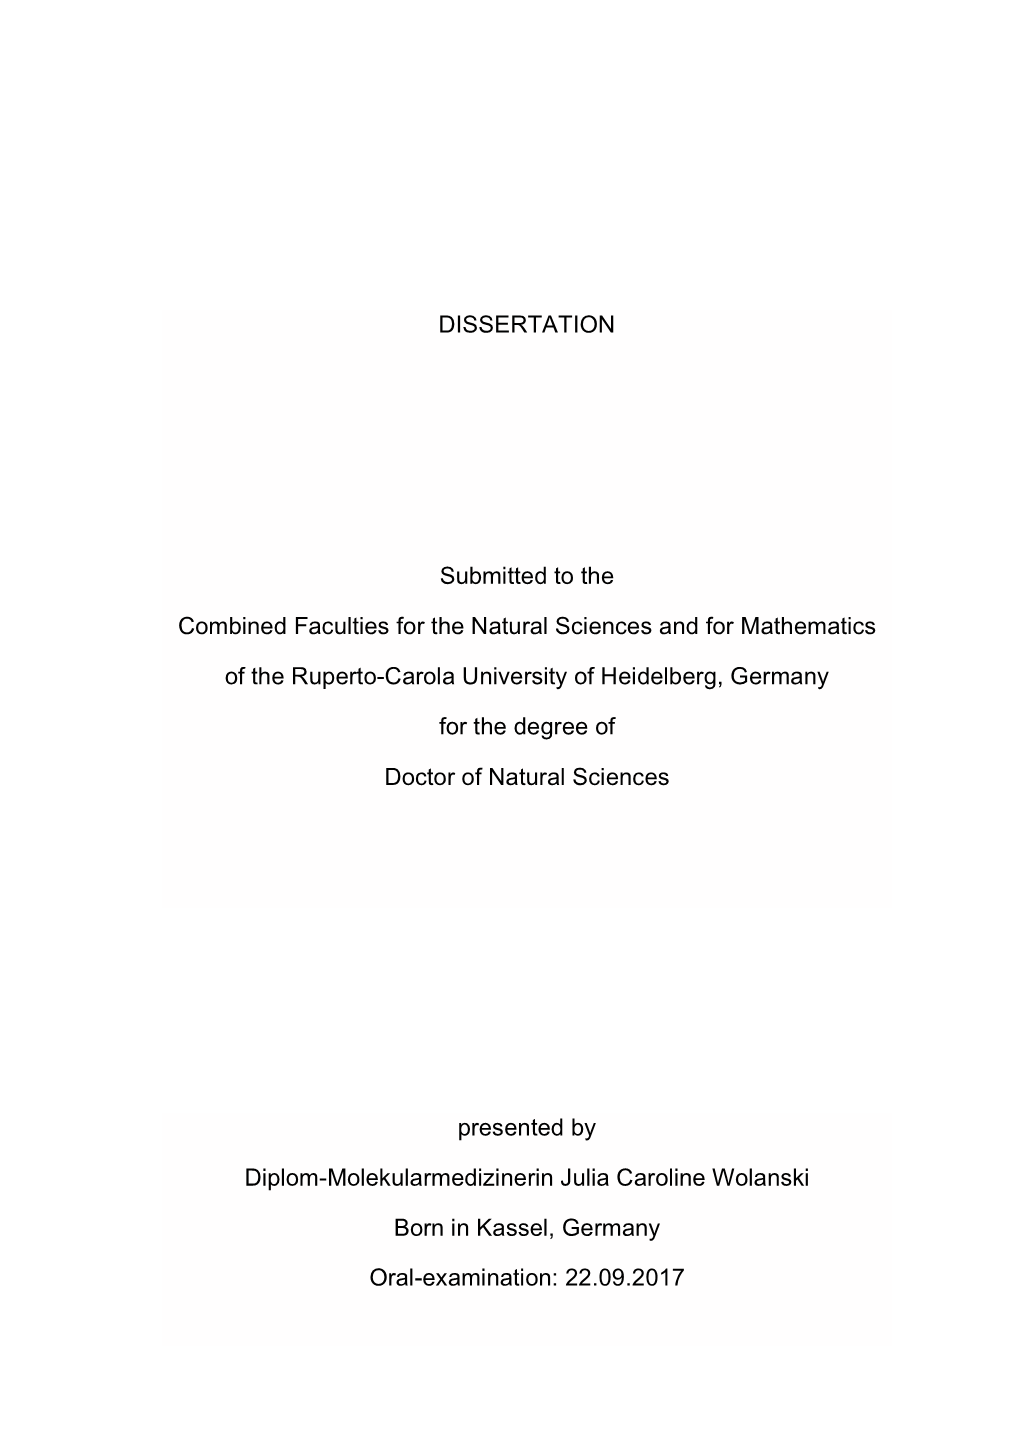 DISSERTATION Submitted to the Combined Faculties for the Natural